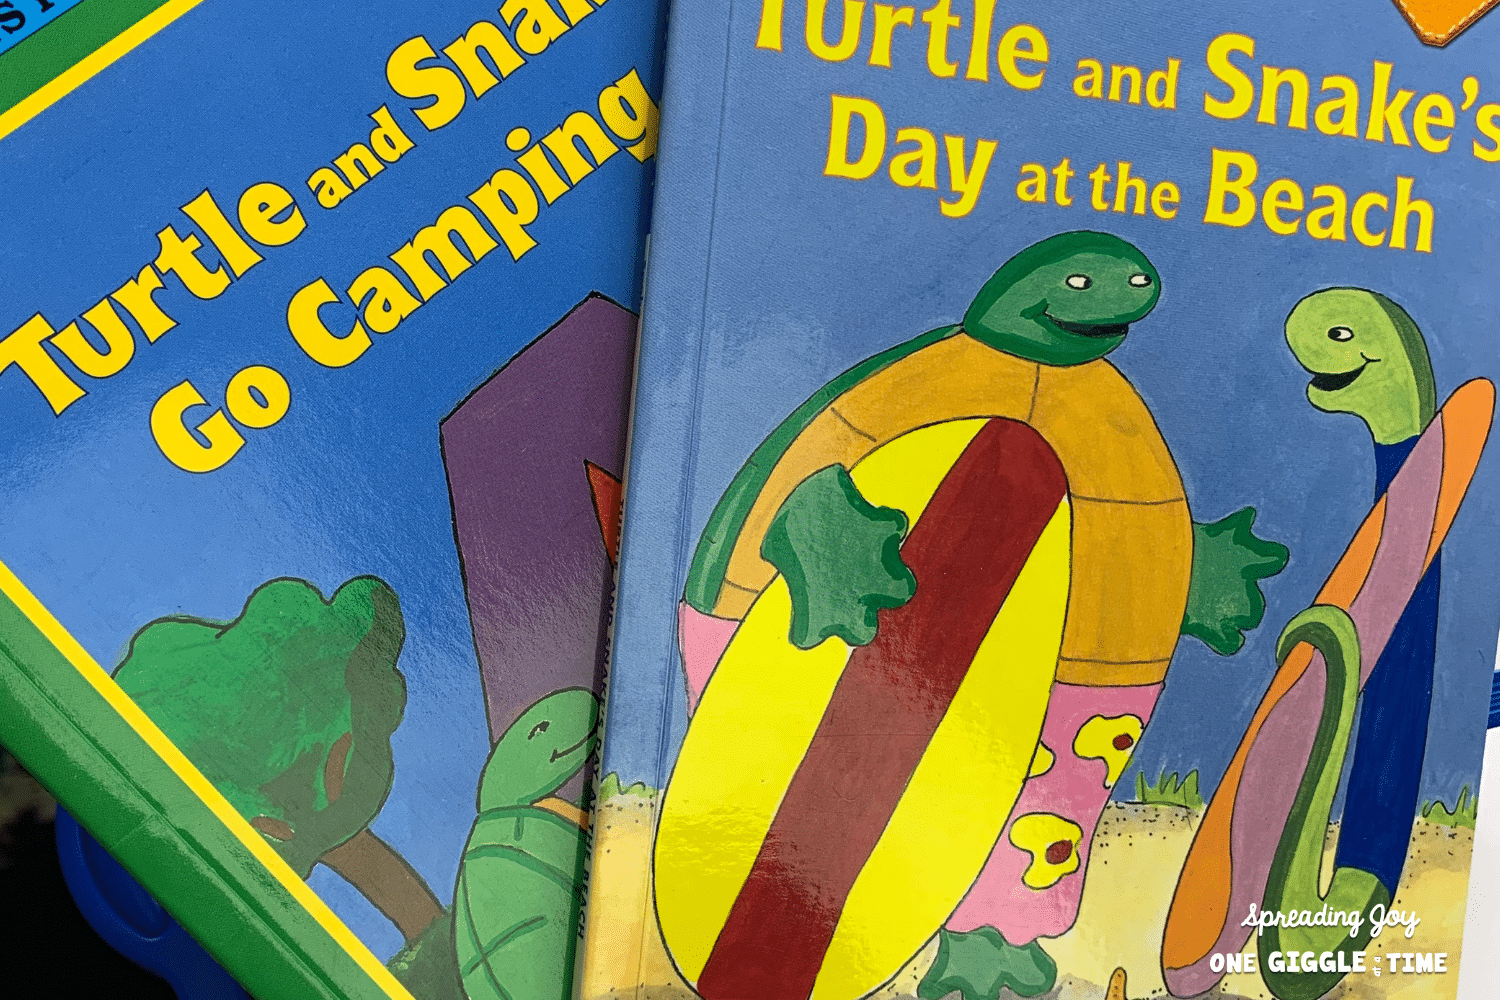 two guided reading titles: Turtle and Snake Go Camping, and Turtle and Snake Day at the Beach.png